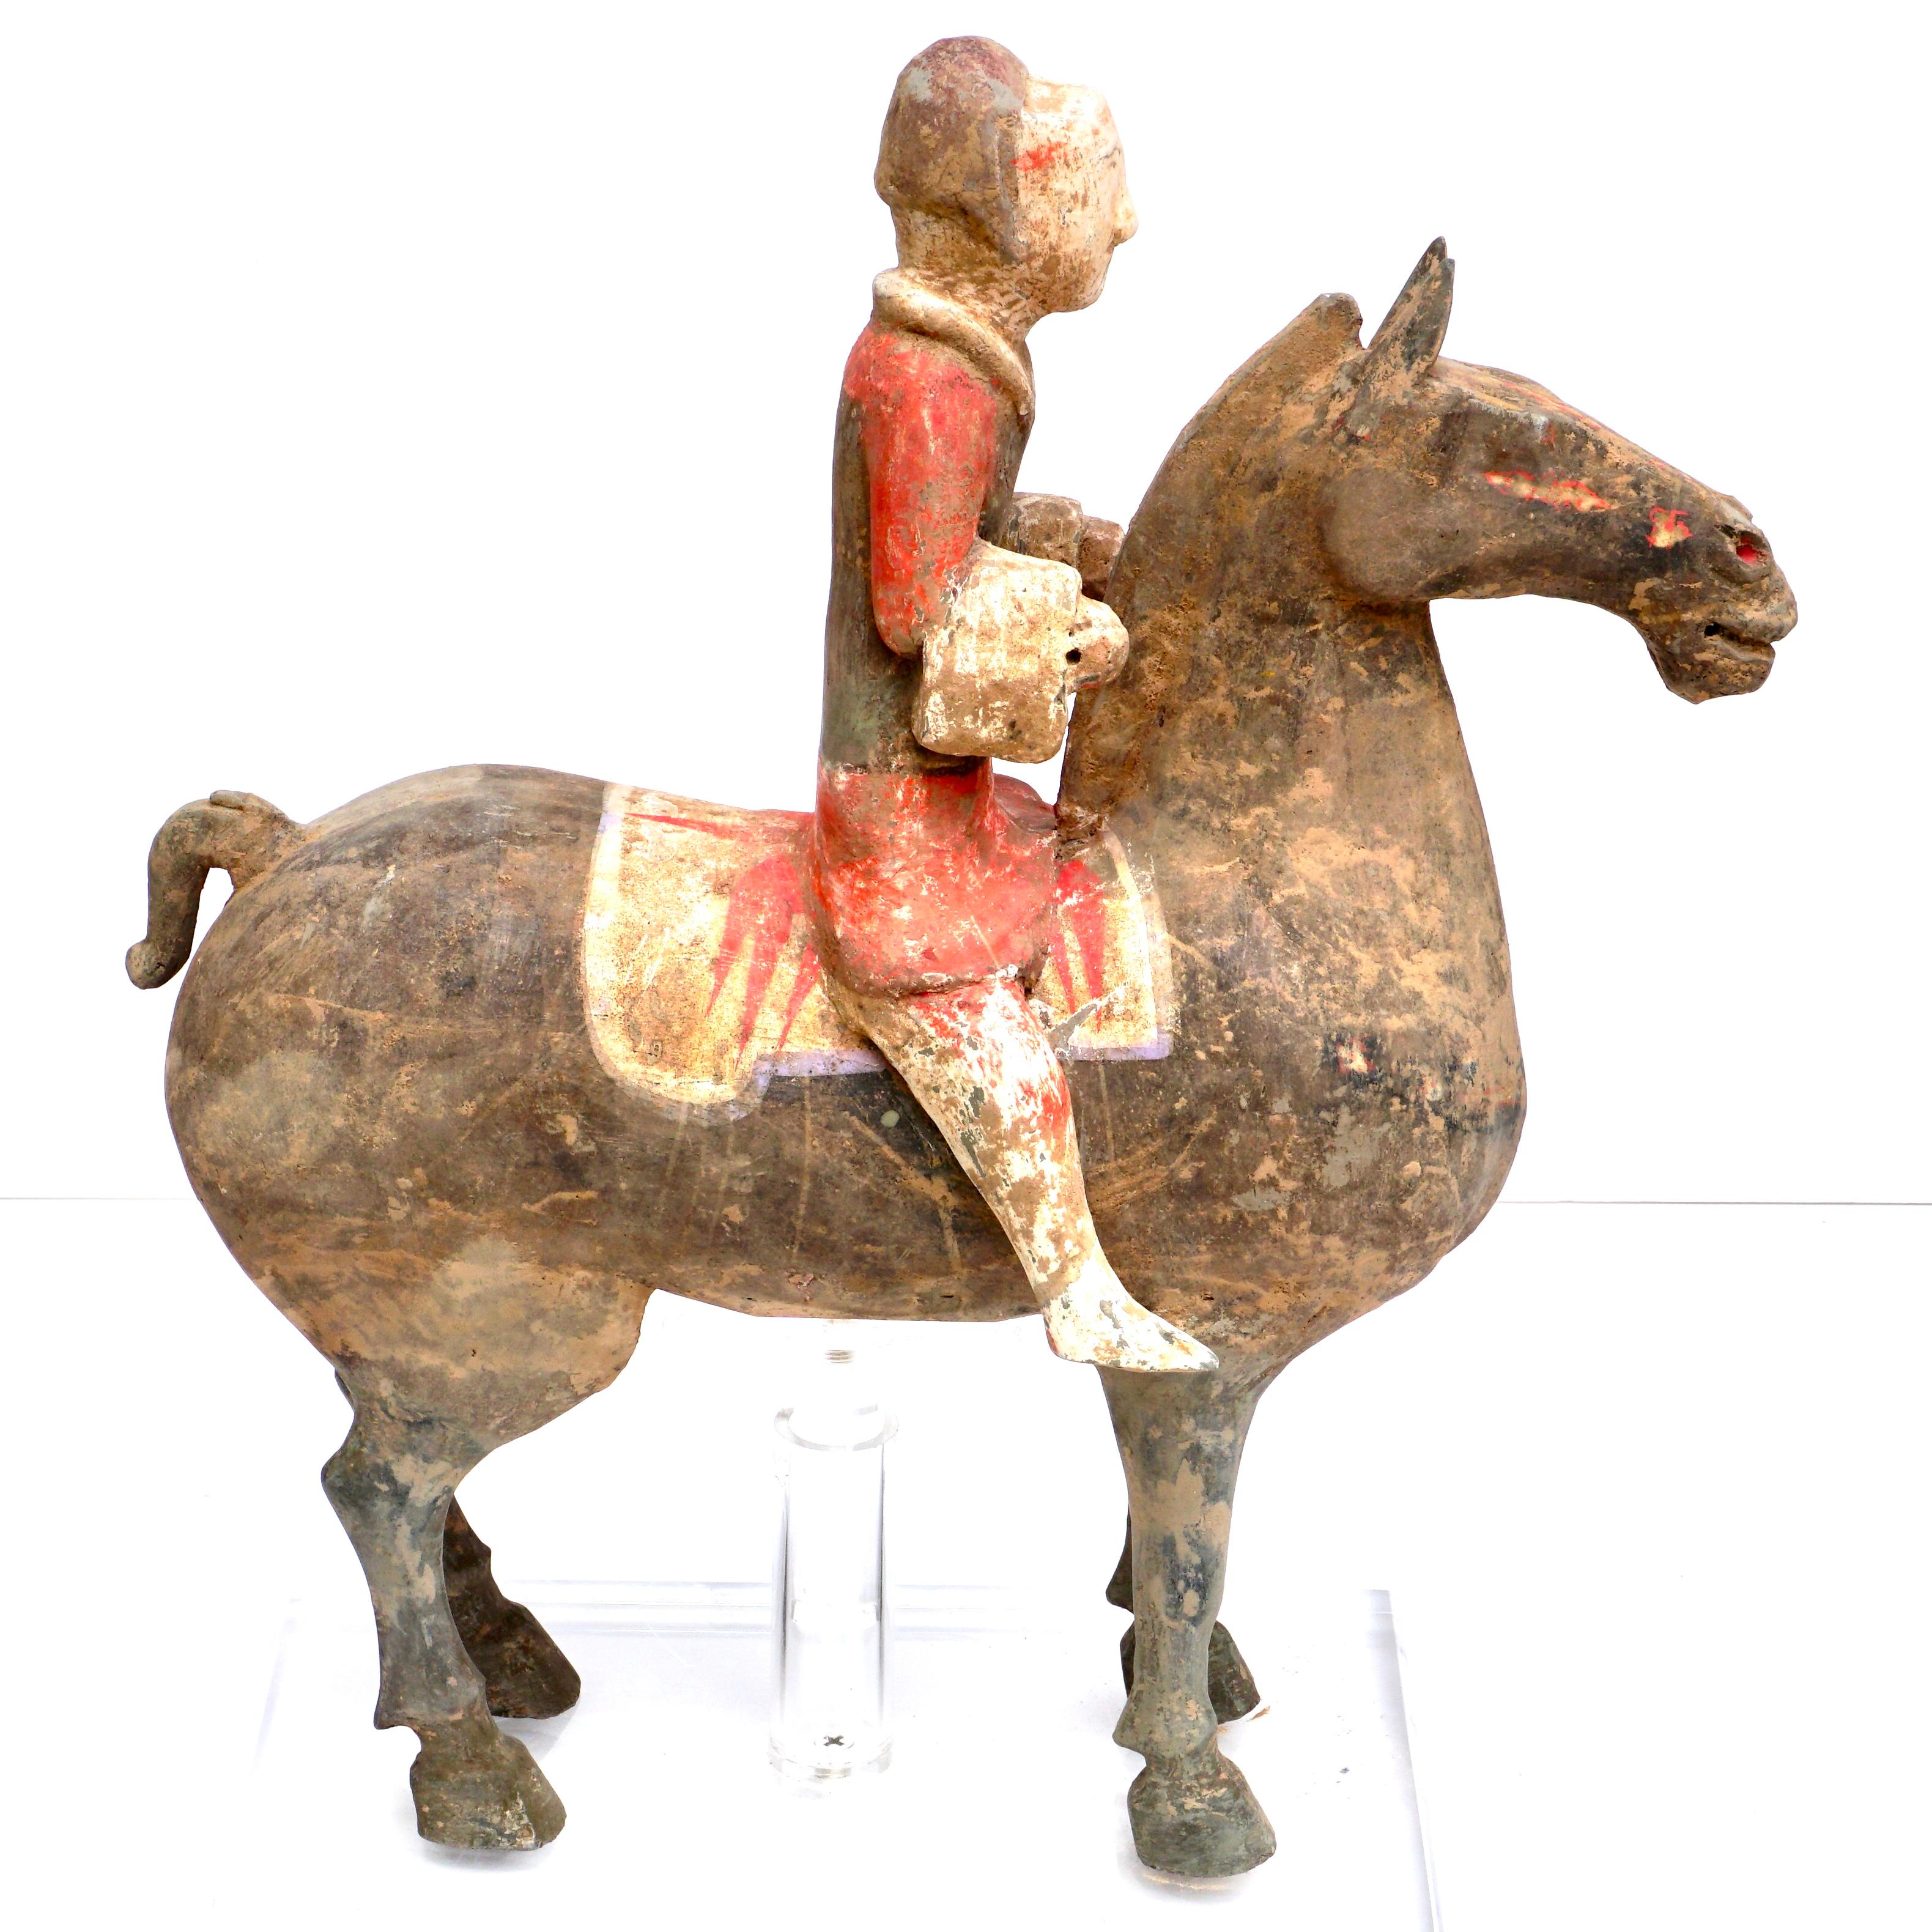 A fine Han dynasty polychrome painted terracotta horse and rider. The warrior is dressed in orange and black on a black horse.

Measures: Height 14 inches (35 cm)
Width 12.5 inches (32 cm).

Condition: Excellent with tastefully undetectable